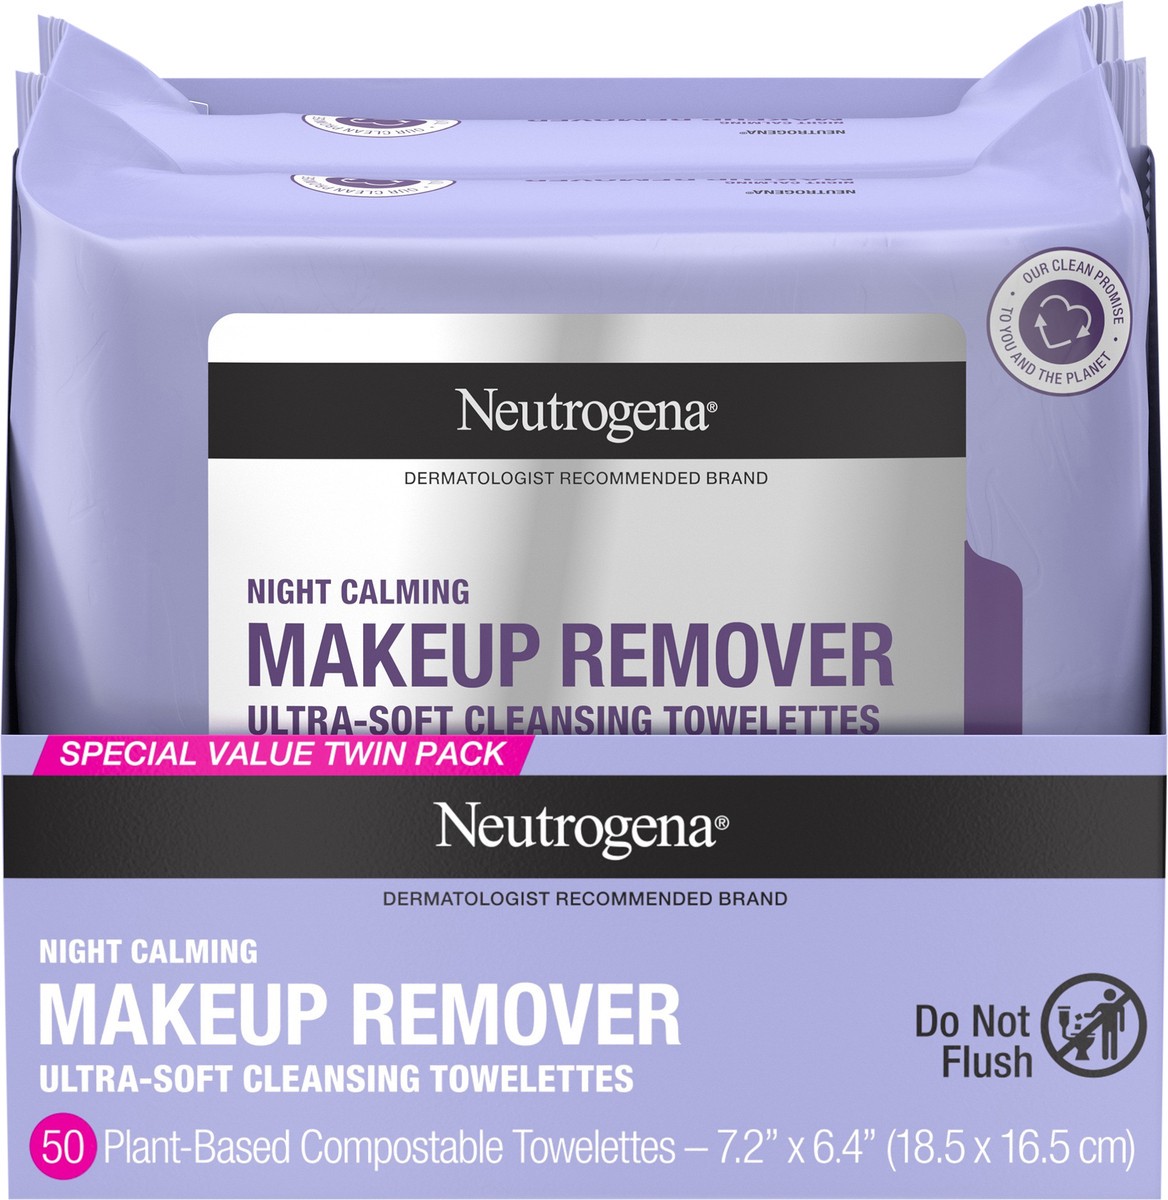 slide 5 of 7, Neutrogena Night Calming Makeup Remover Face Wipes, Nighttime Cleansing Towelettes Remove Sweat, Dirt & Makeup & Calms Skin, Hypoallergenic, 100% Plant Based Cloth, Twin Pack, 2 x 25 ct, 50 ct